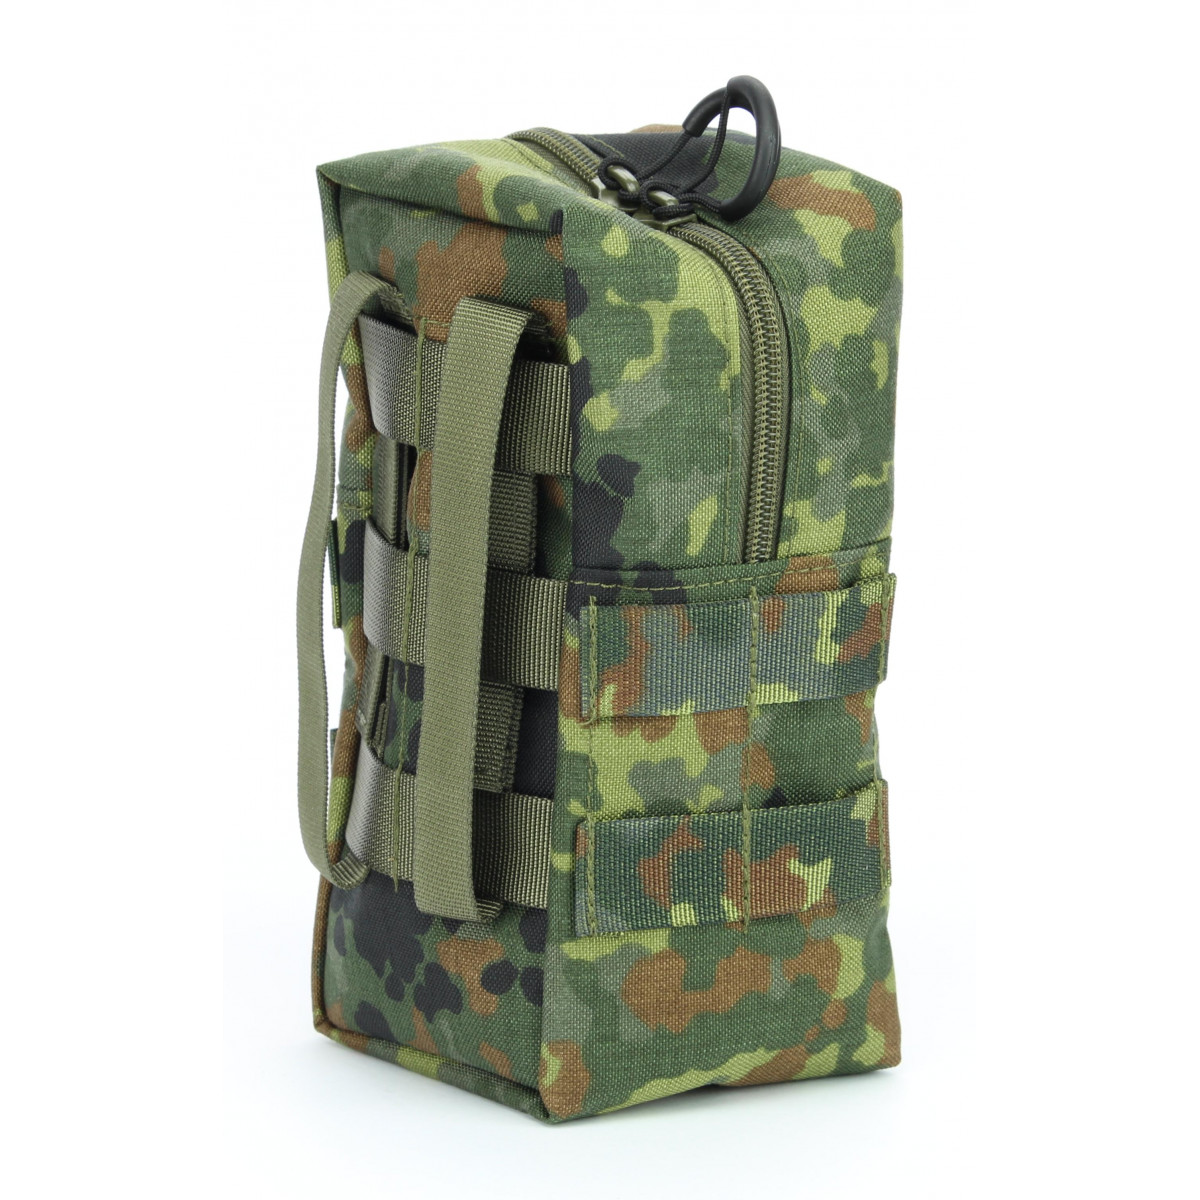 Army Gp-pouch small 1.6 liters with Molle.